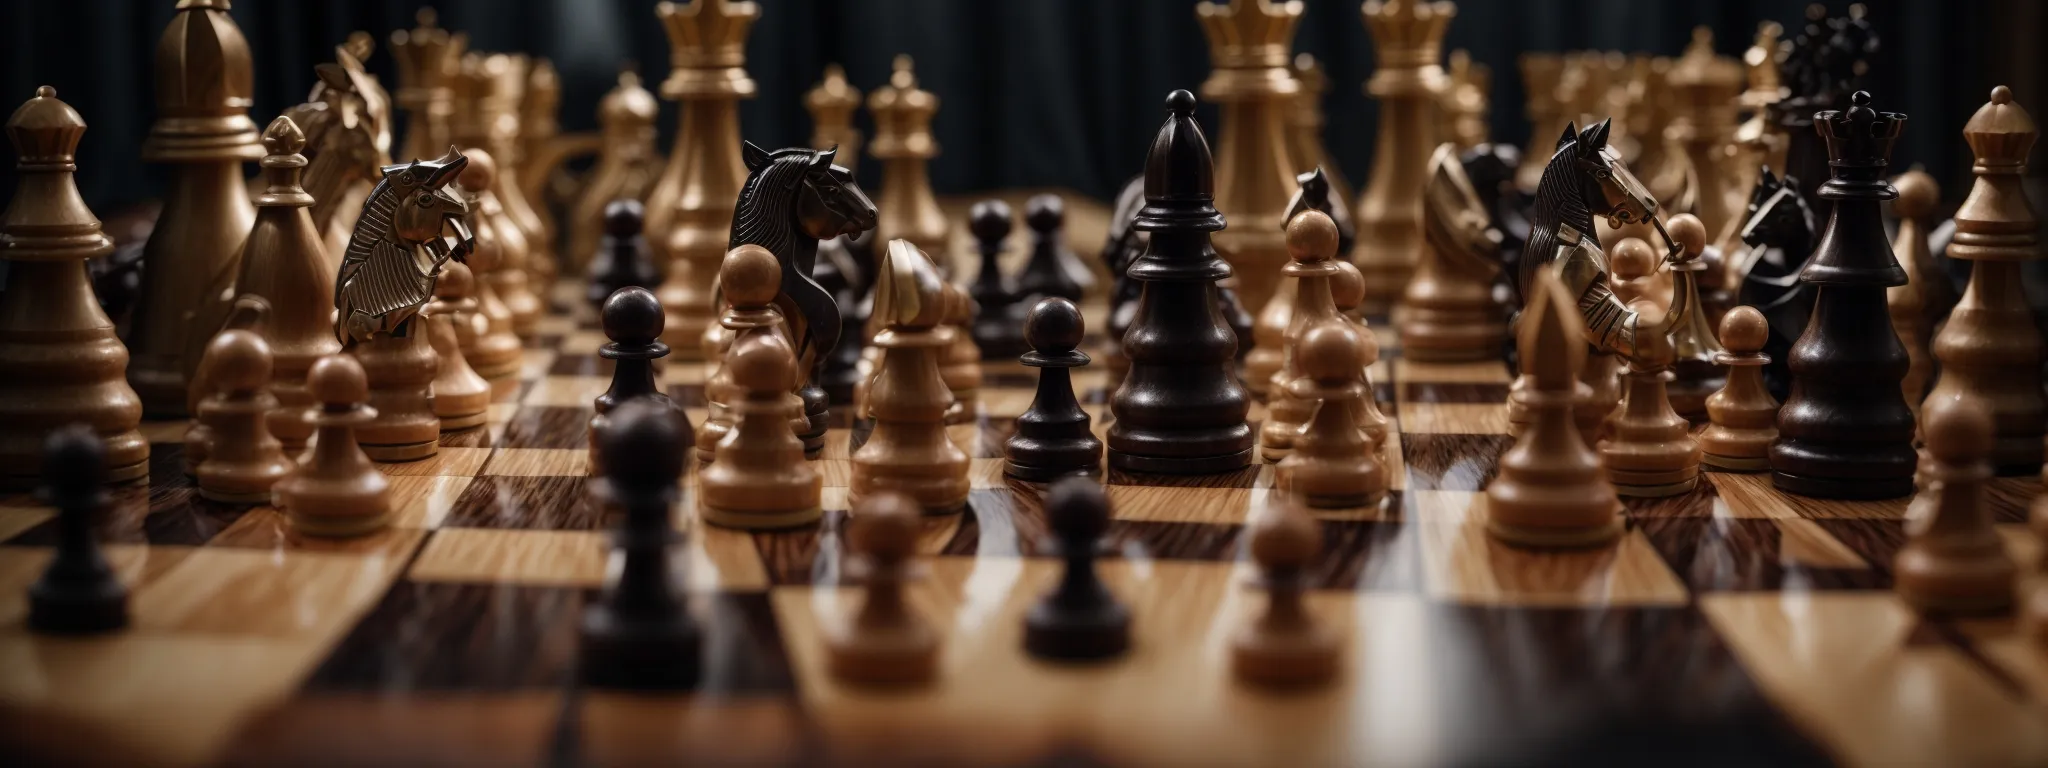 a panorama of battle-ready chess pieces facing off on an intricate board, signifying strategic competition in a dynamic field.